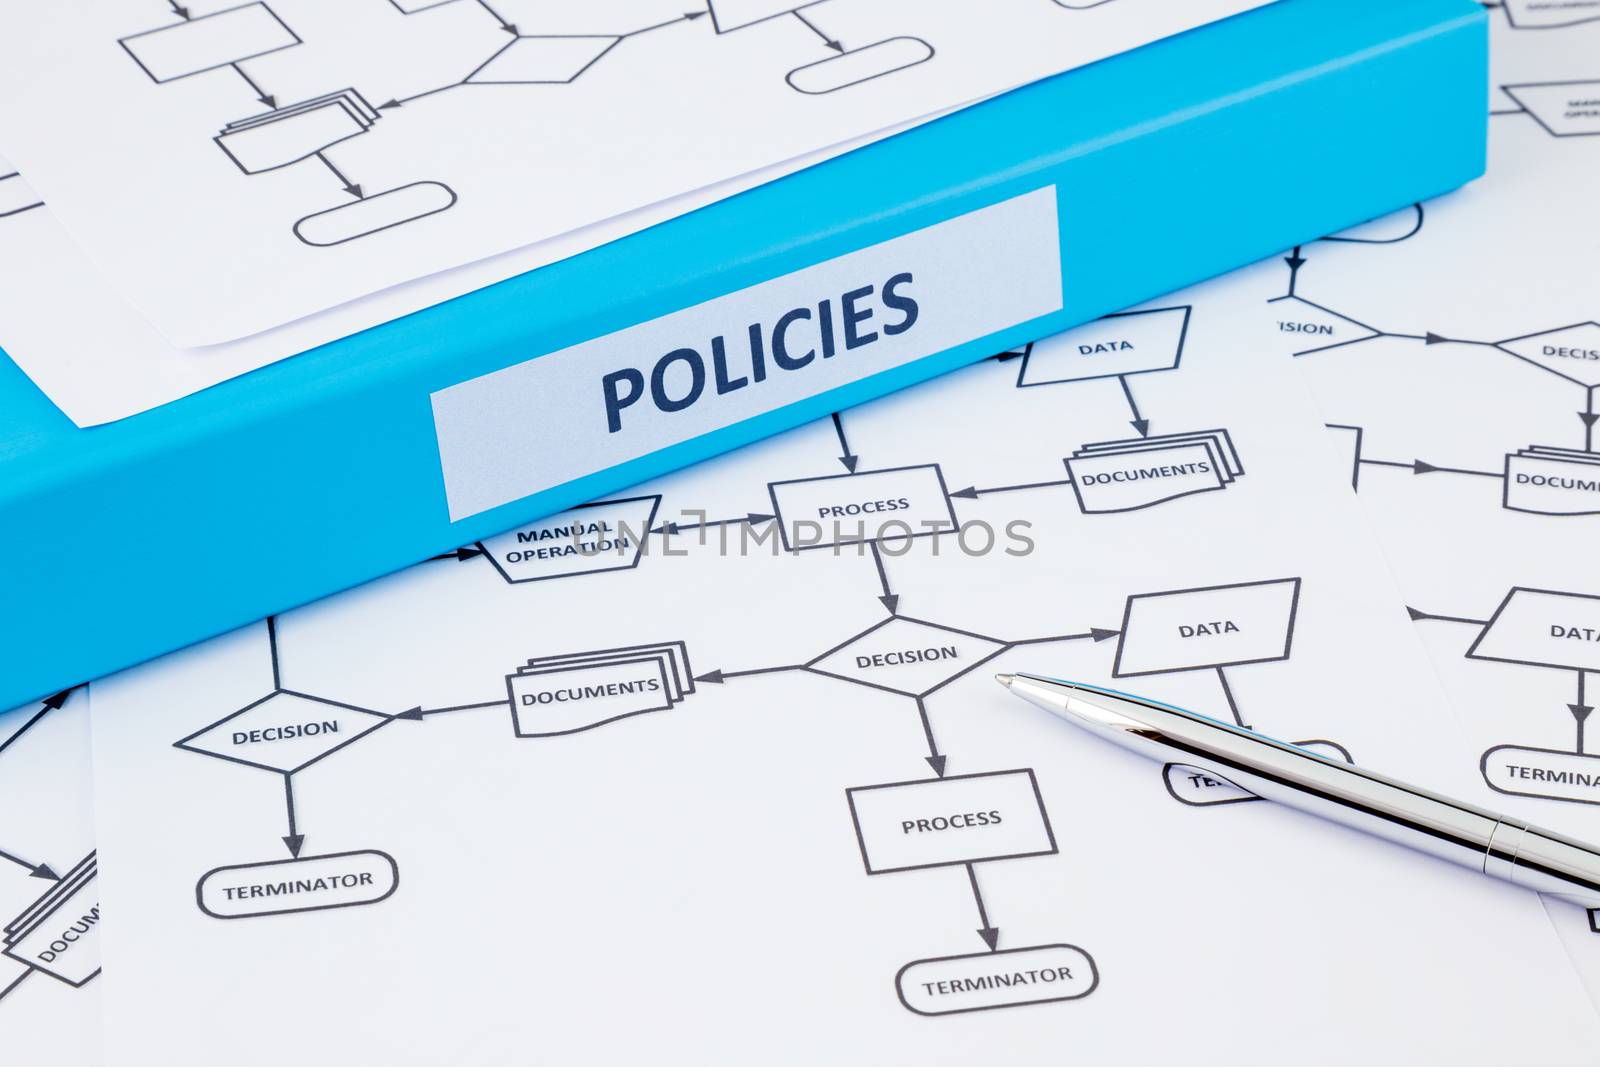 Business policies and strategic management by vinnstock